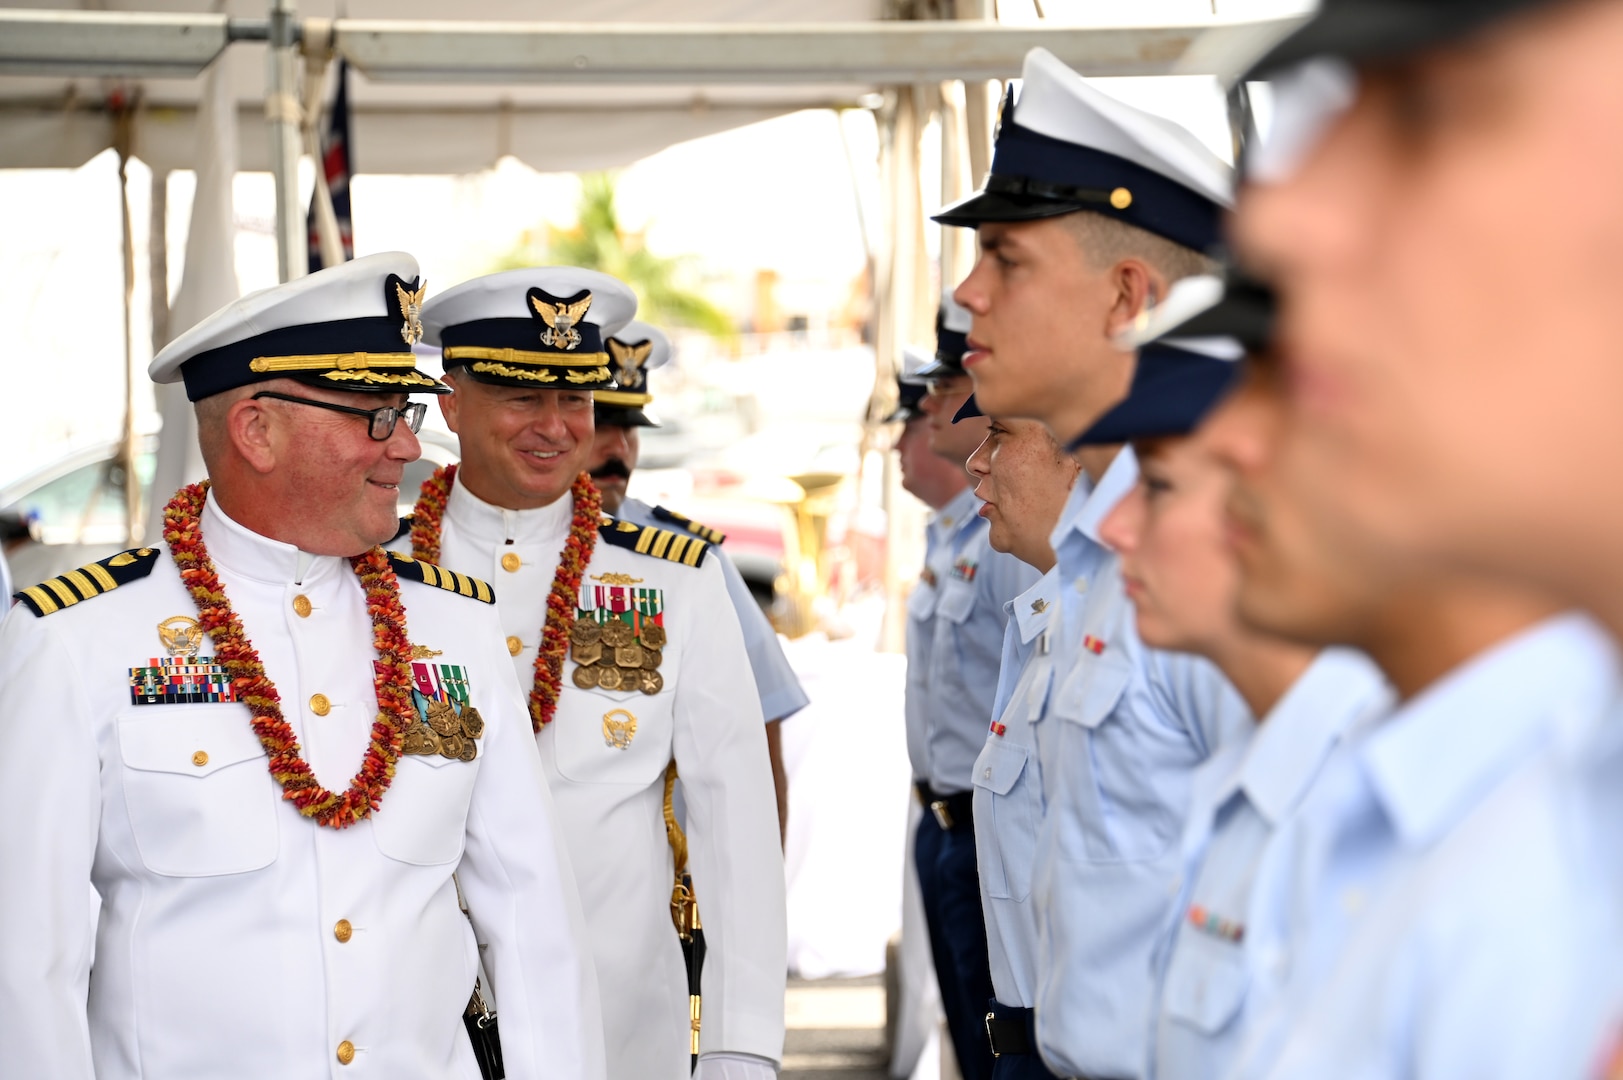 Capt. Tom D’Arcy (left) and Capt. Bob Kinsey (right) conduct a personnel inspection during the U.S. Coast Guard Cutter Kimball’s (WMSL 756) change of command ceremony on Base Honolulu, July 21, 2023. Rear Adm. Brendan C. McPherson, deputy commander of U.S. Coast Guard Pacific Area, presided over the ceremony in which Kinsey relieved D’Arcy as Kimball’s commanding officer. U.S. Coast Guard photo by Chief Petty Officer Matthew Masaschi.